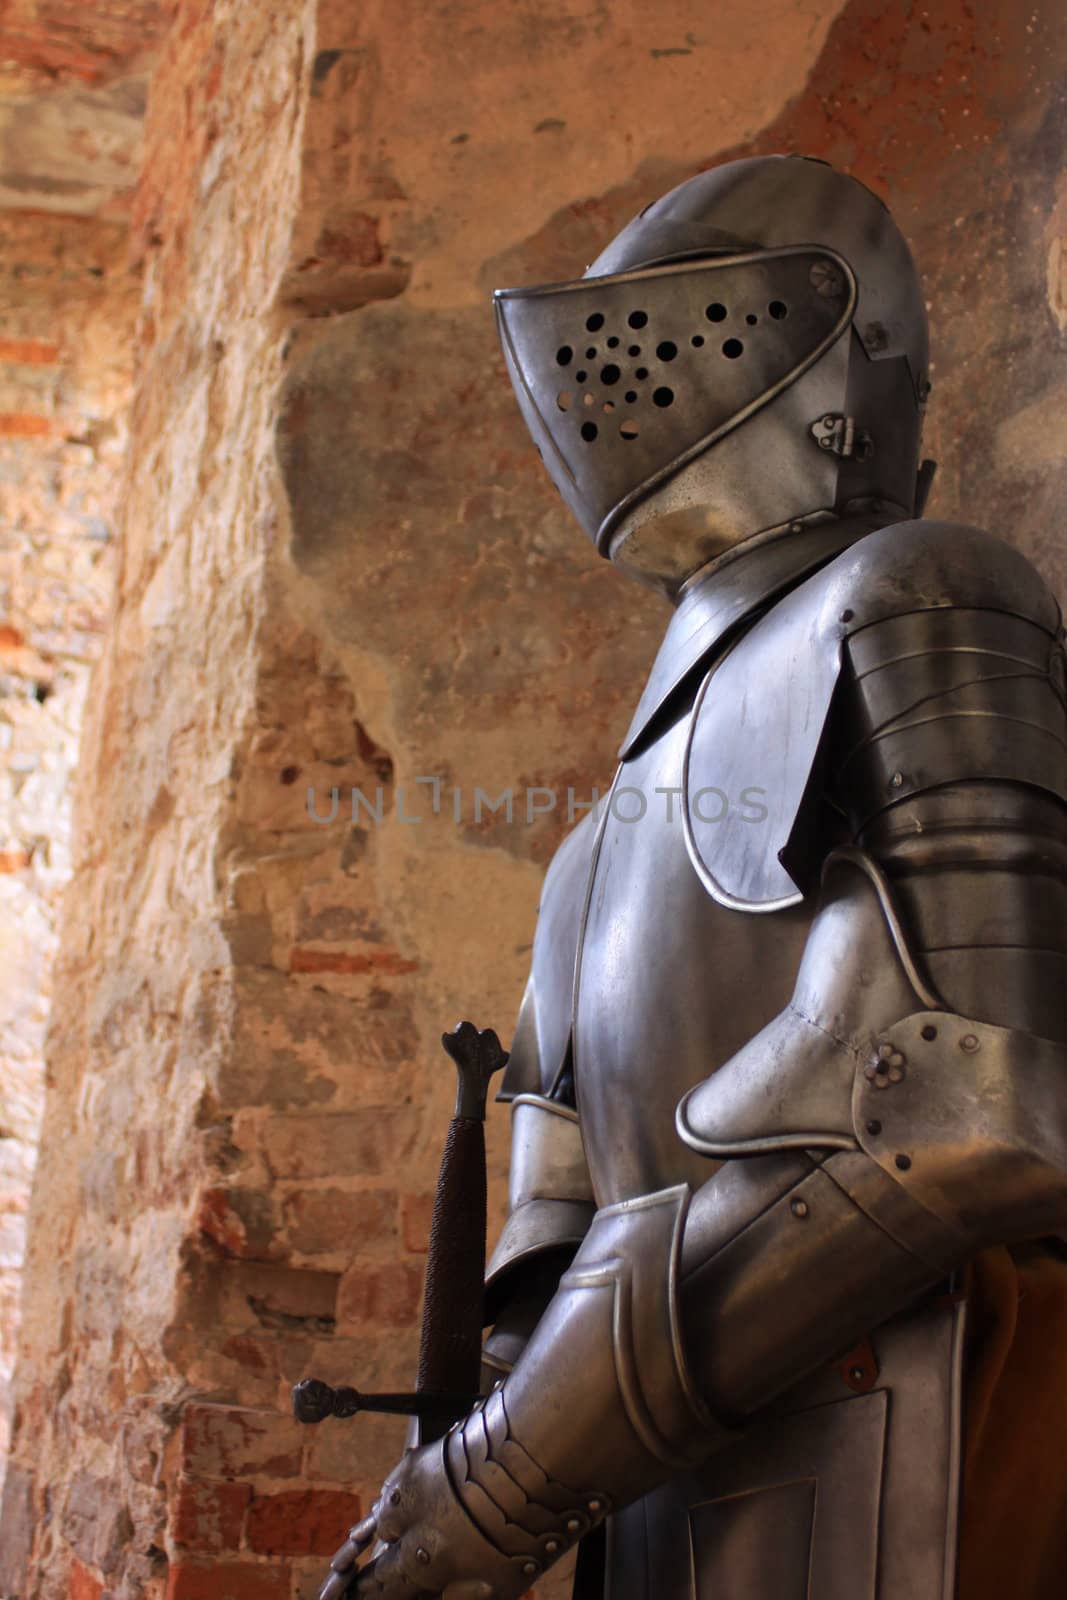 A medieval suit of armour with sword set against a stone bricked wall background.